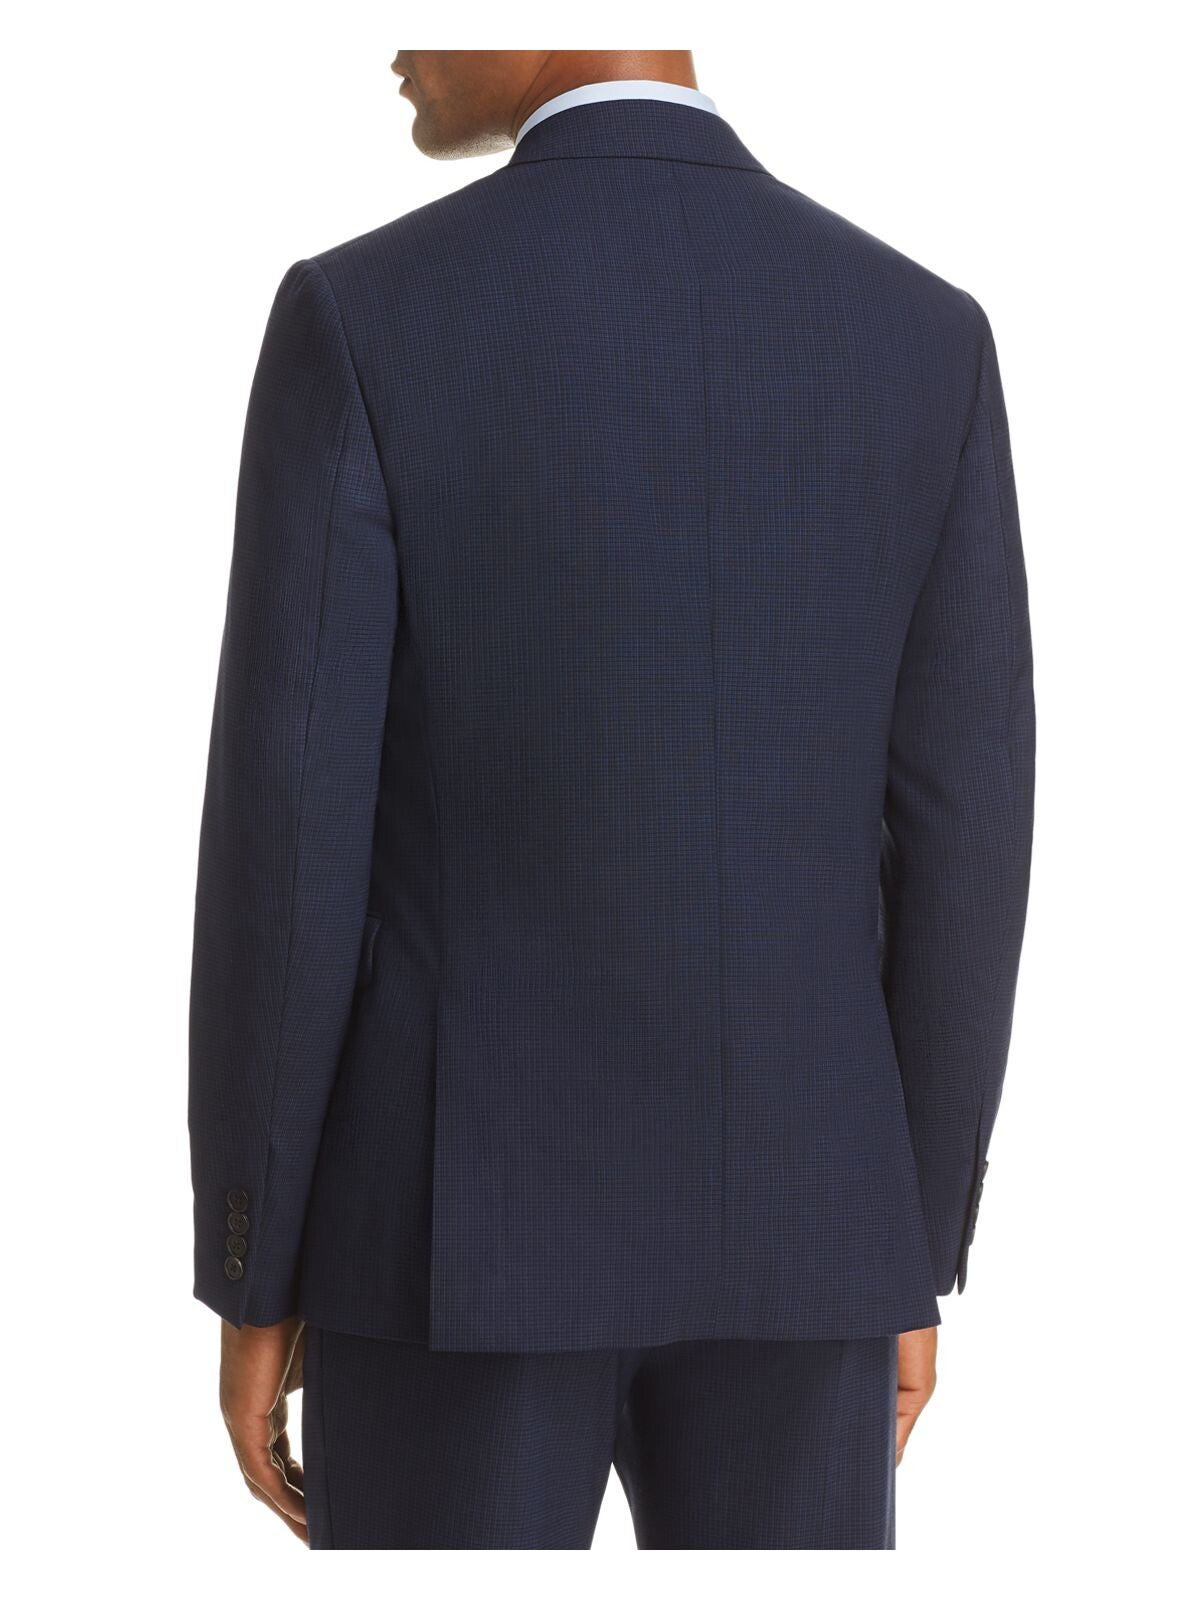 THEORY Mens Blue Single Breasted, Jacket 42R